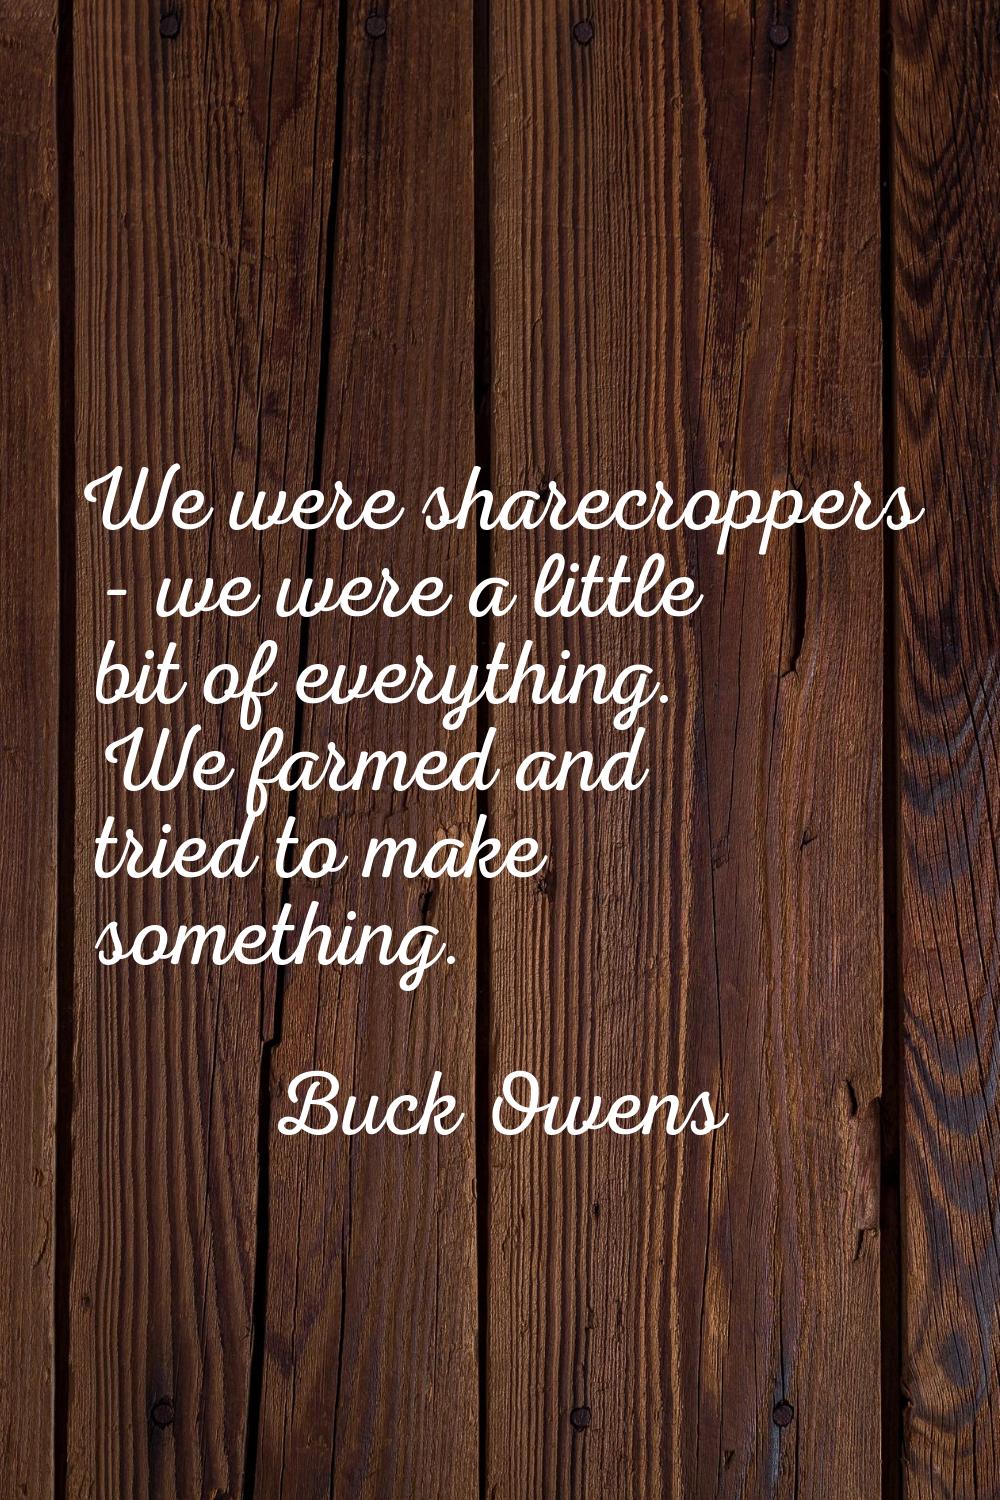 We were sharecroppers - we were a little bit of everything. We farmed and tried to make something.